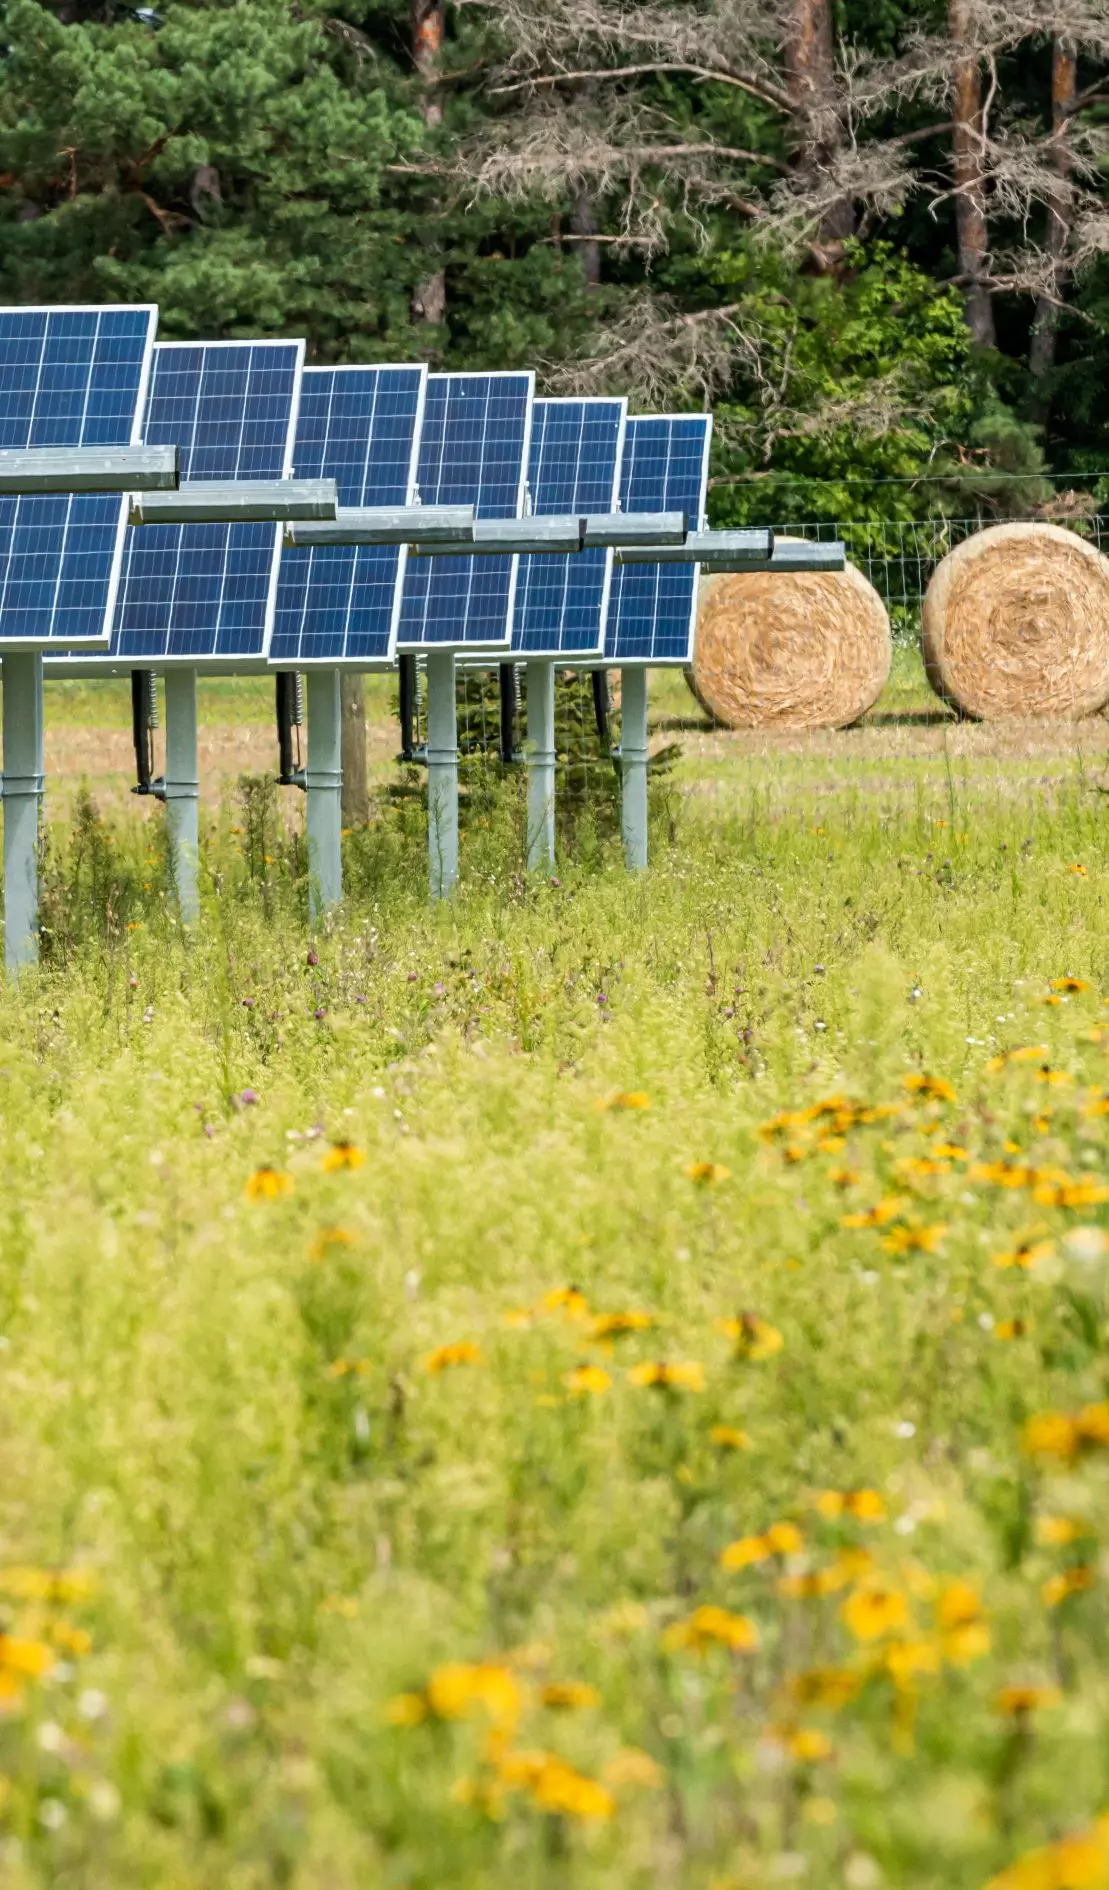 Solar panels in a field by hay bales